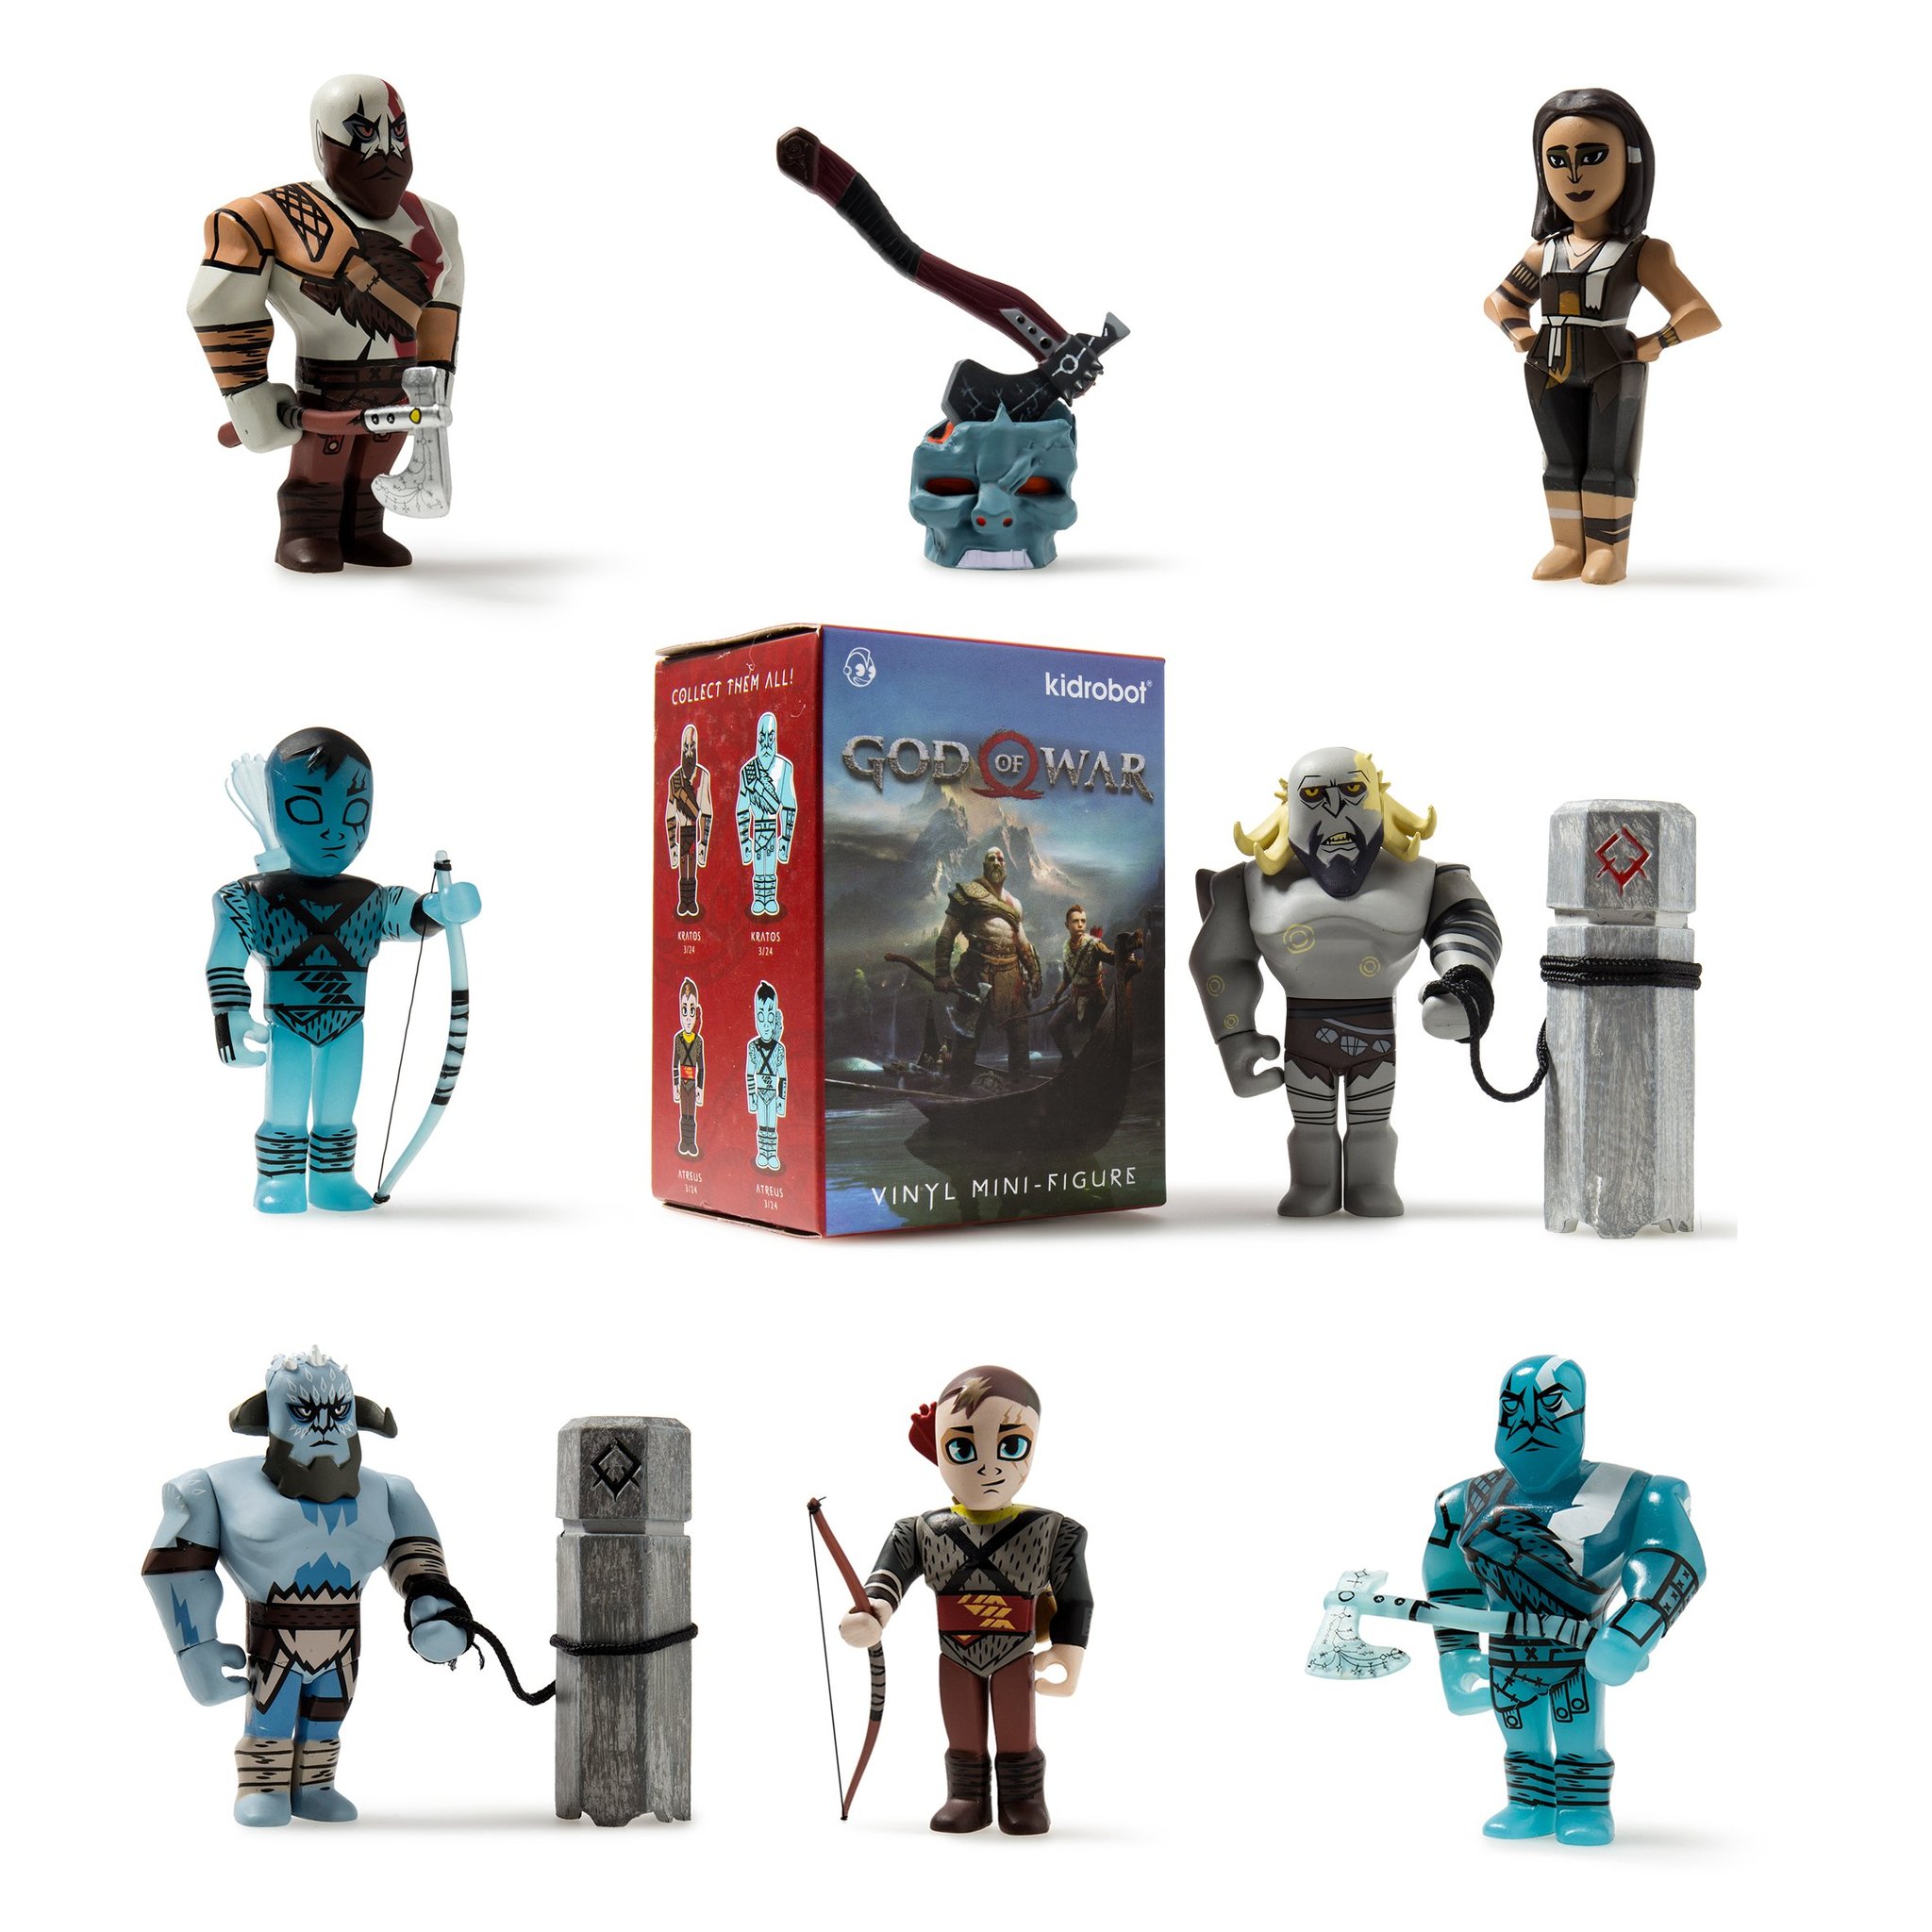 God of War Toys, Mini Figures and Collectibles by Kidrobot